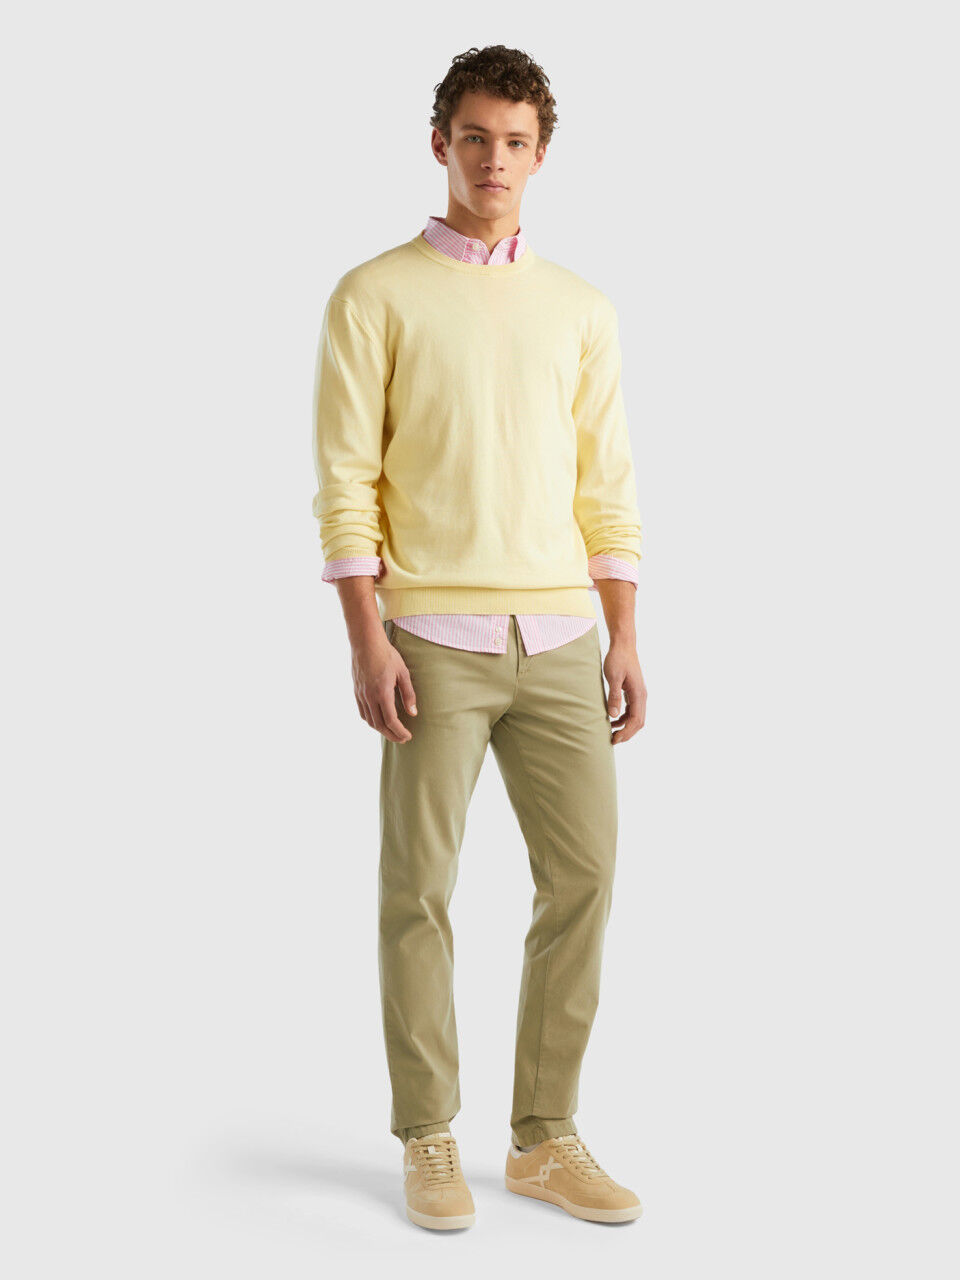 Men's Yellow Pants Outfits-35 Best Ways to Wear Yellow Pants | Mens yellow  pants, Yellow pants outfit, Yellow pants